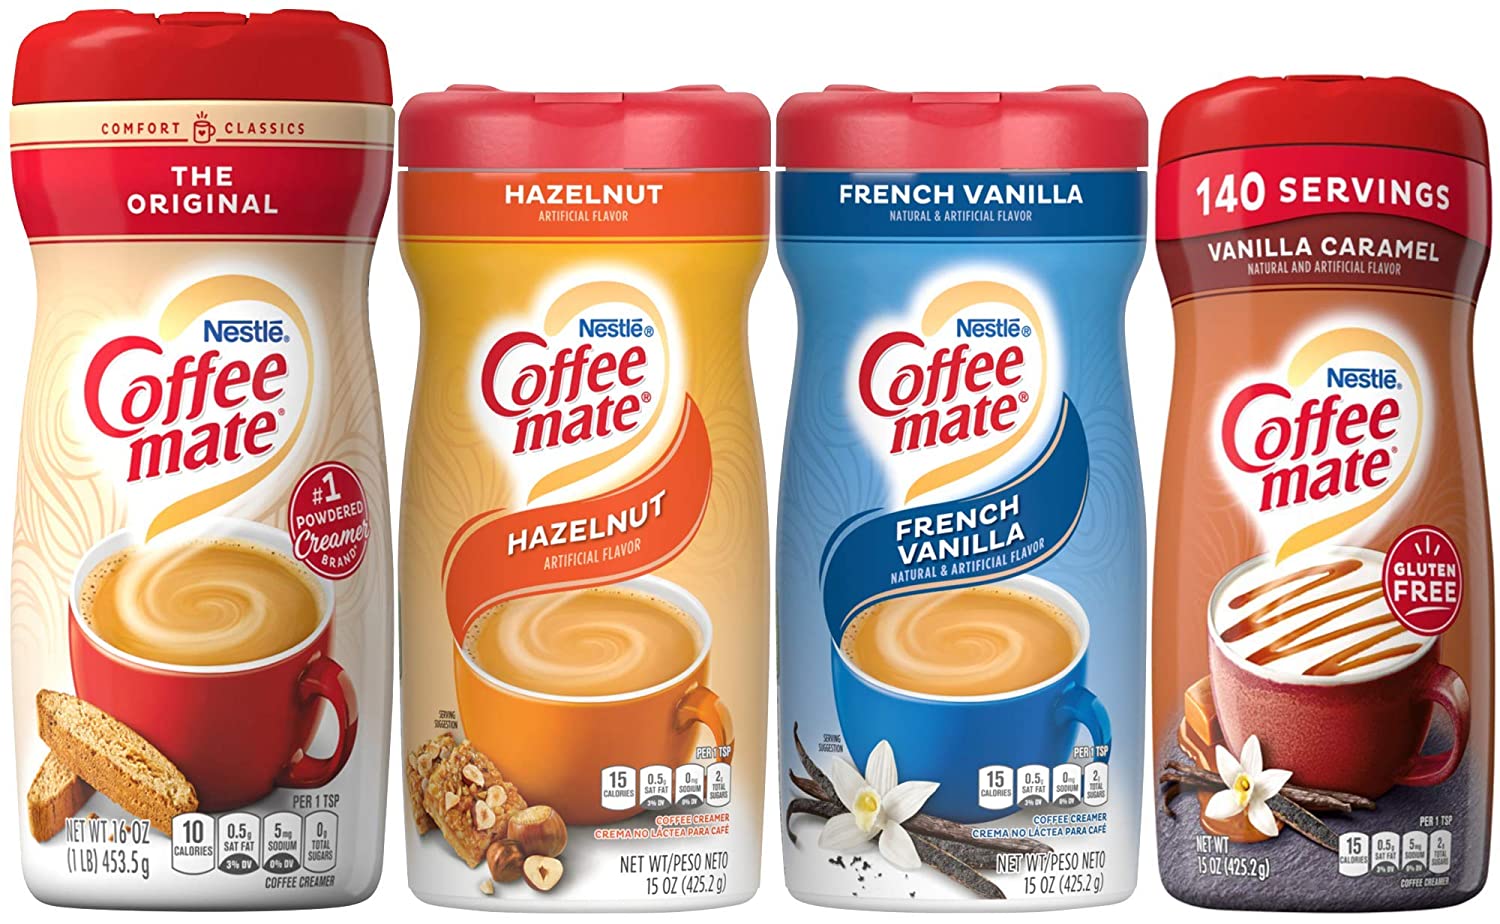 Four containers of Coffeemate flavored non-dairy creamer